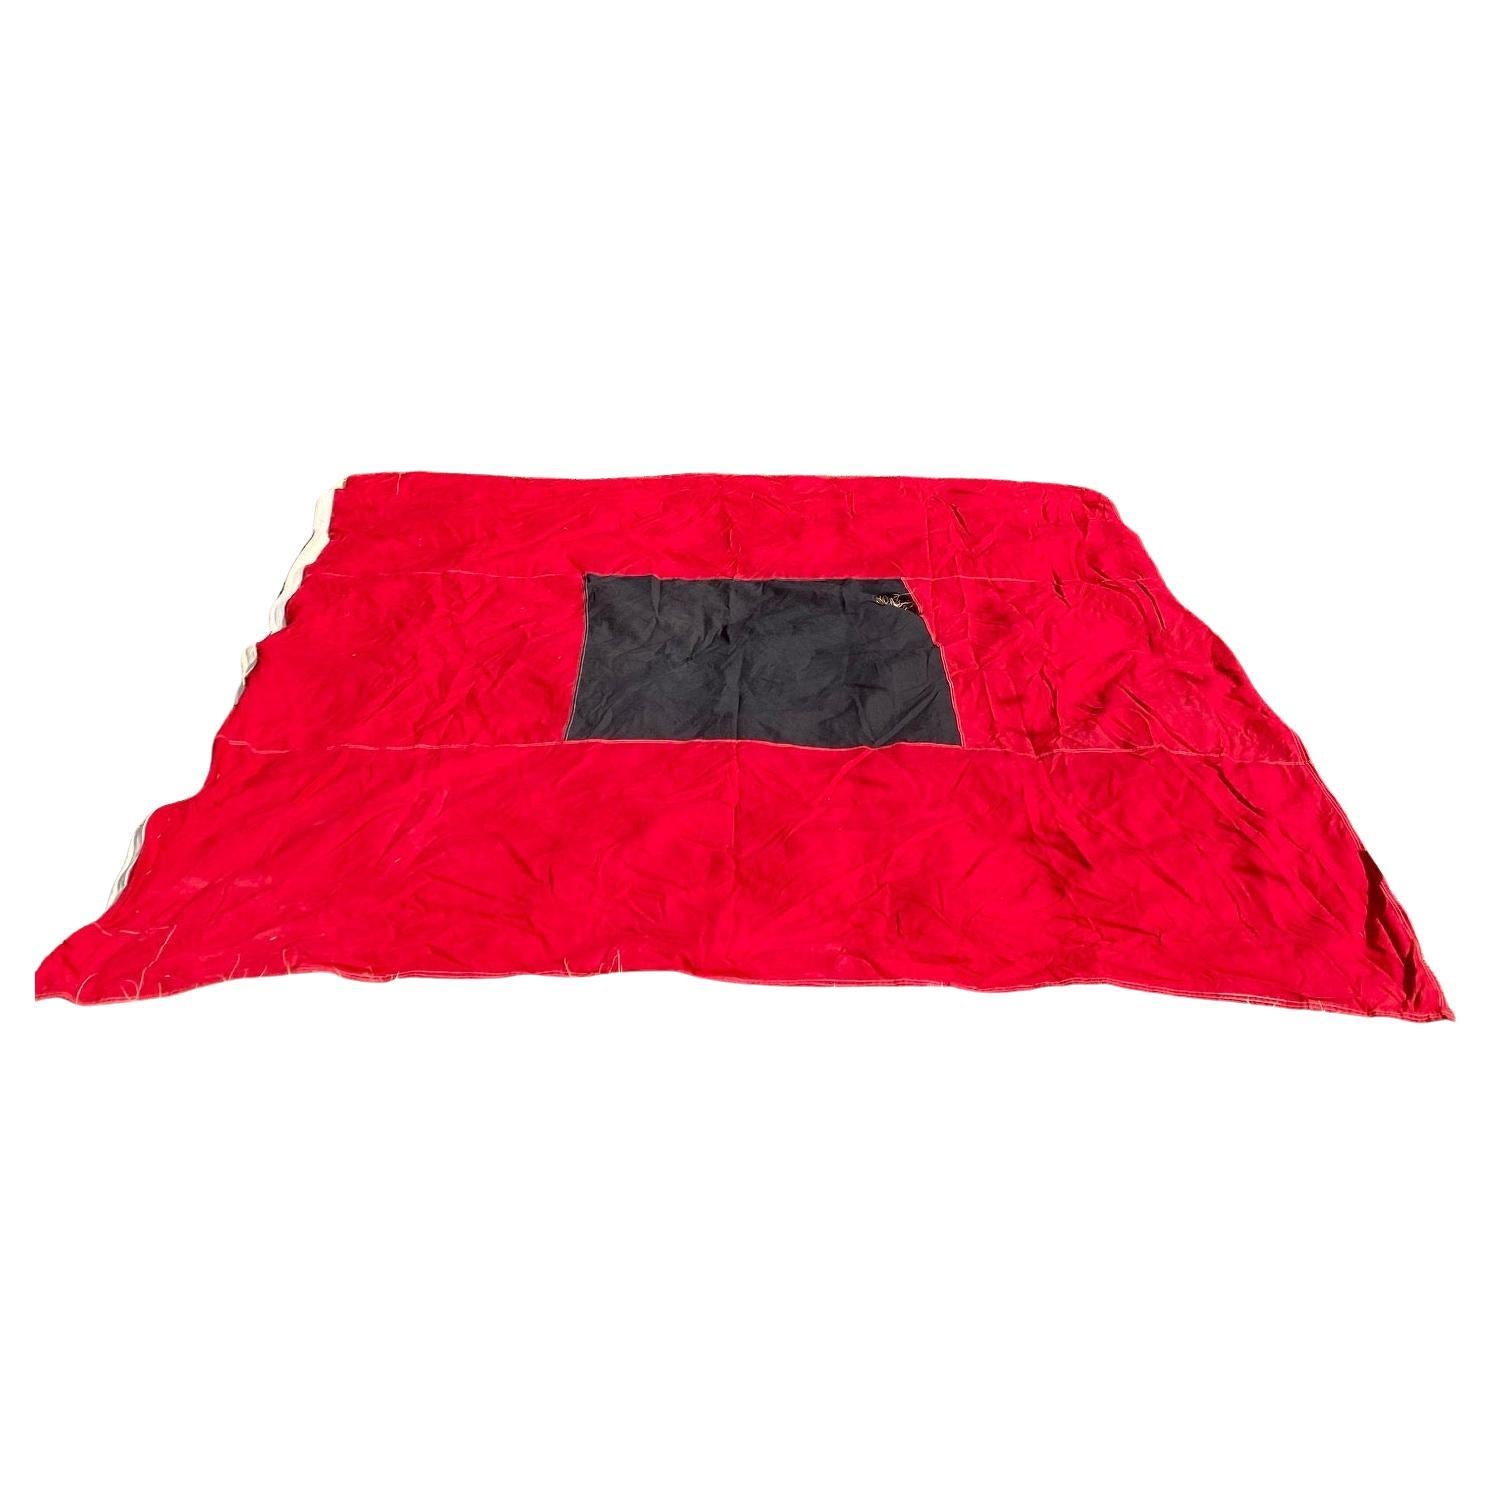 Vintage U.S. Coast Guard Hurricane or storm warning flag, circa 1930s, or possibly 1940s, a machine stitched wool bunting flag with black square on red field, with reinforced corners near the manila bunt-line. One of these flown by itself at a Coast